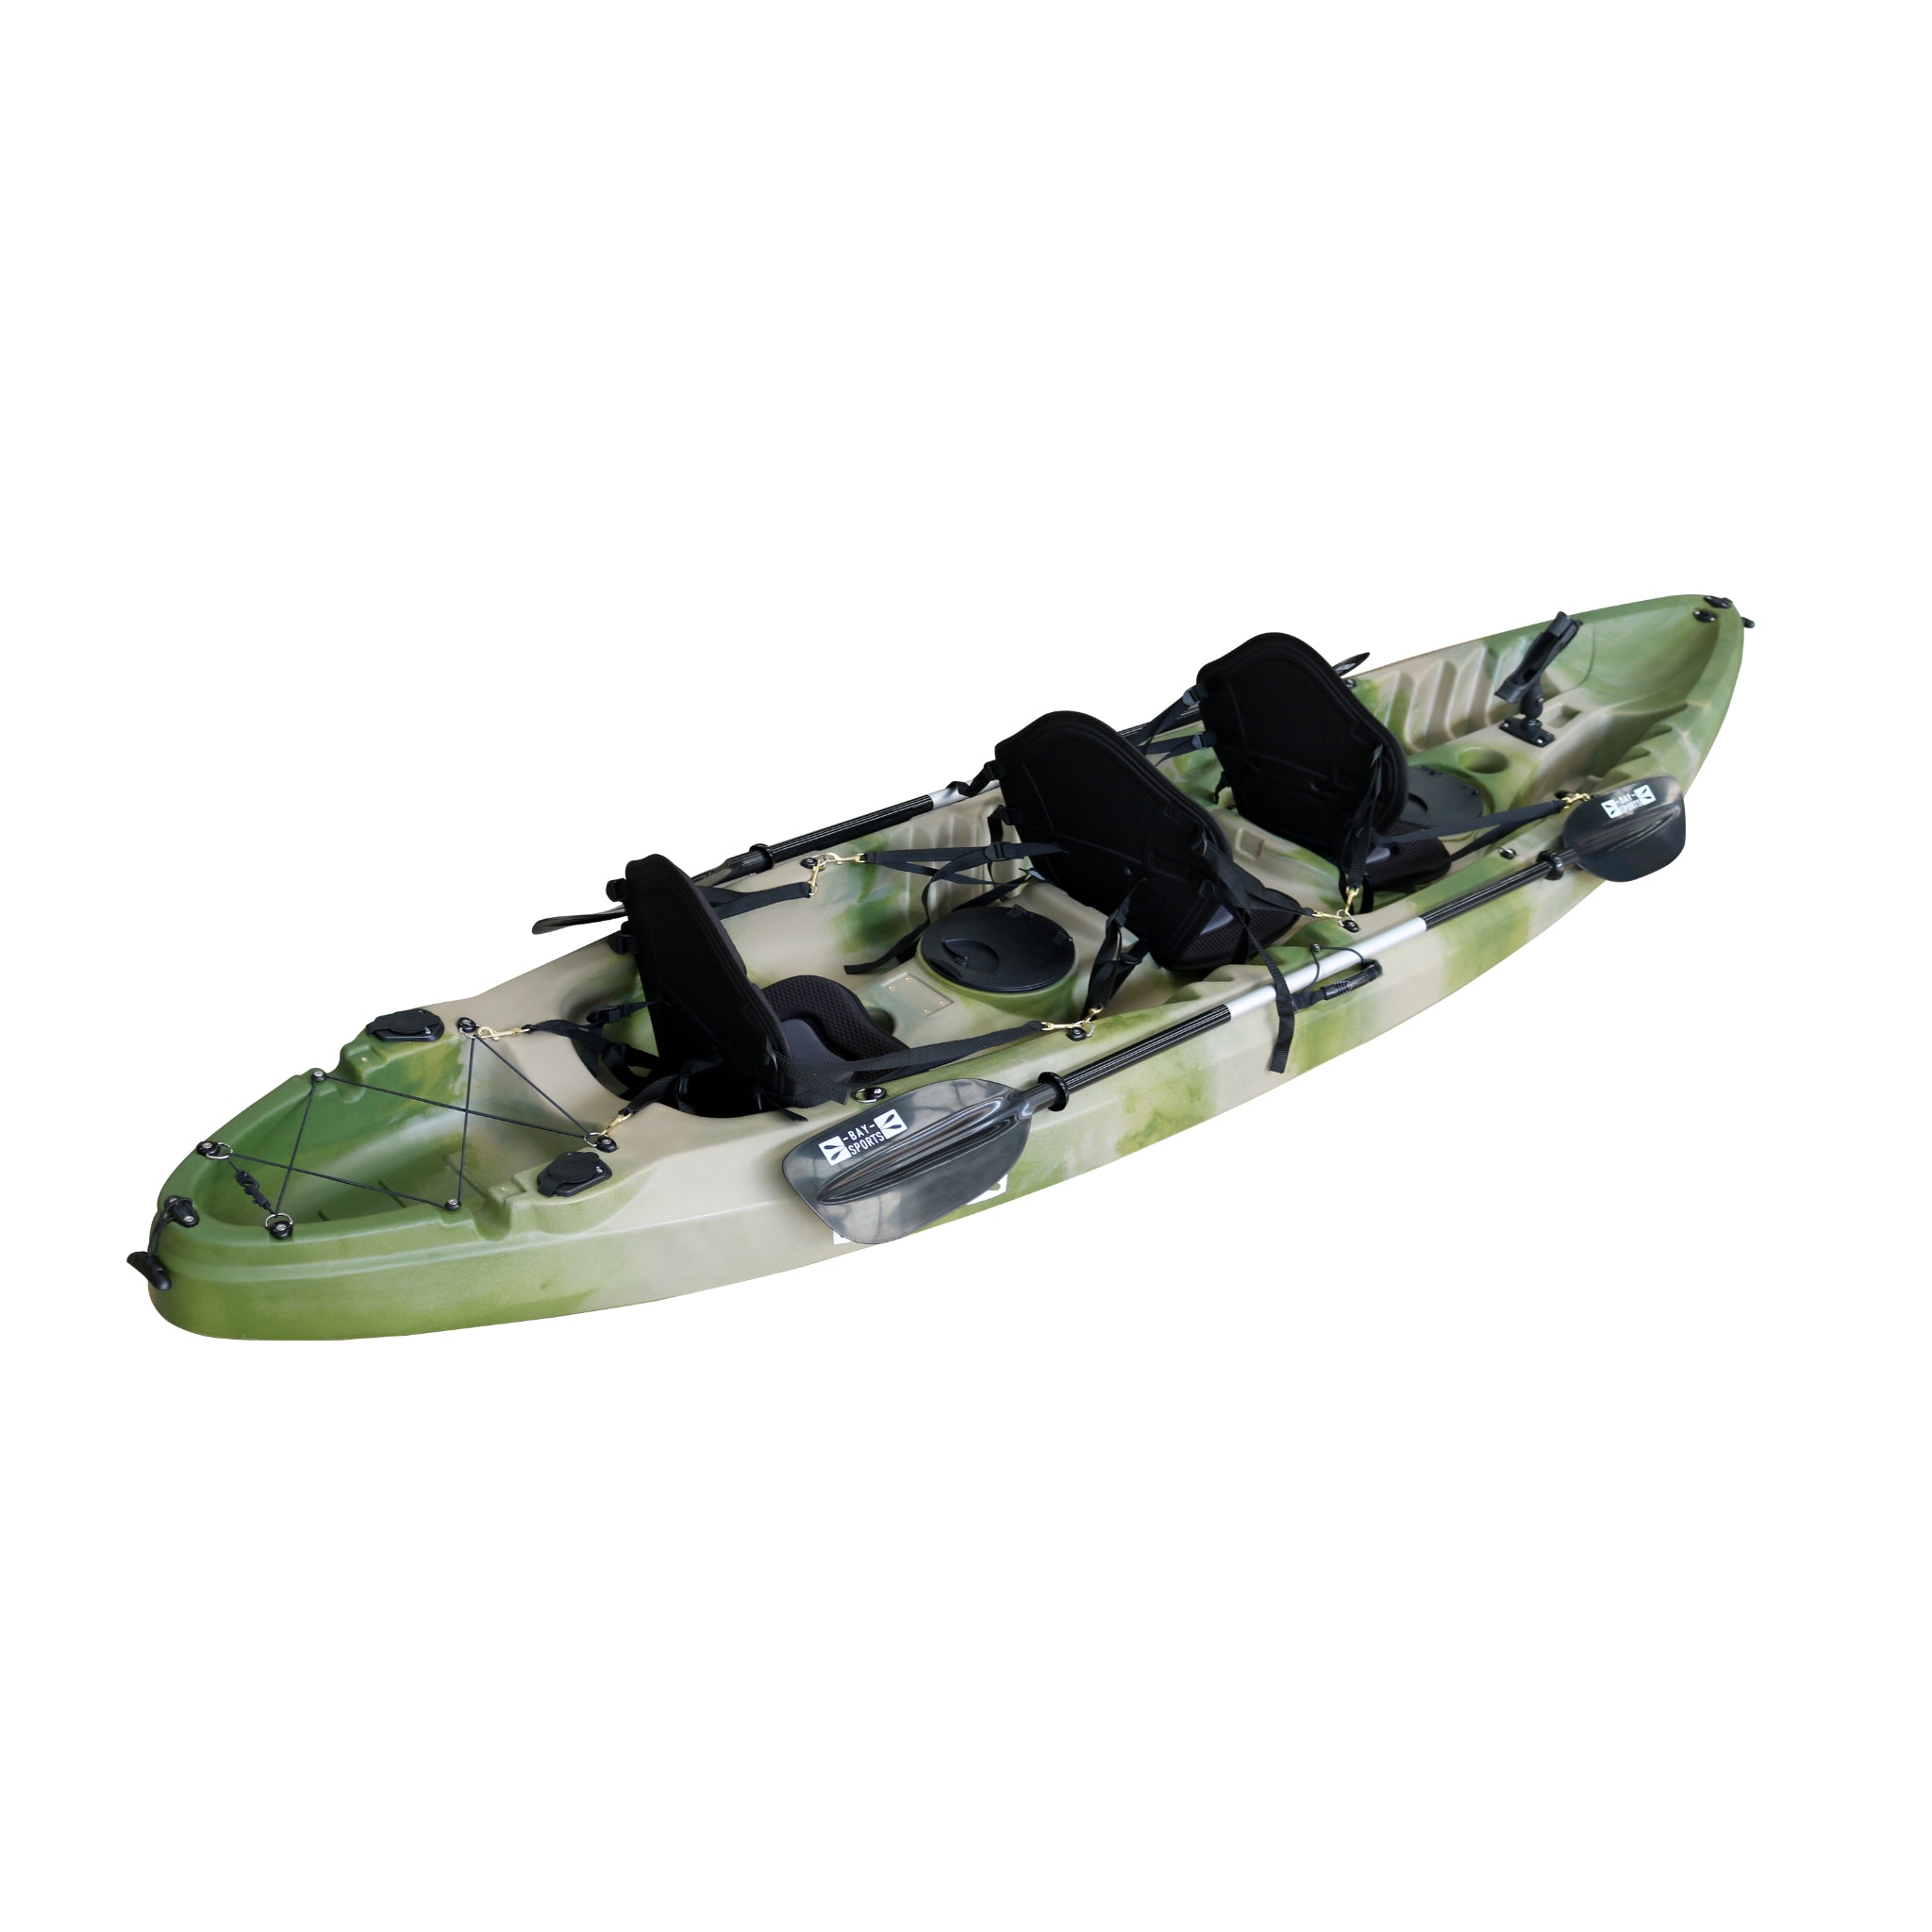 Top 25 Best Two Person Tandem Fishing Kayaks